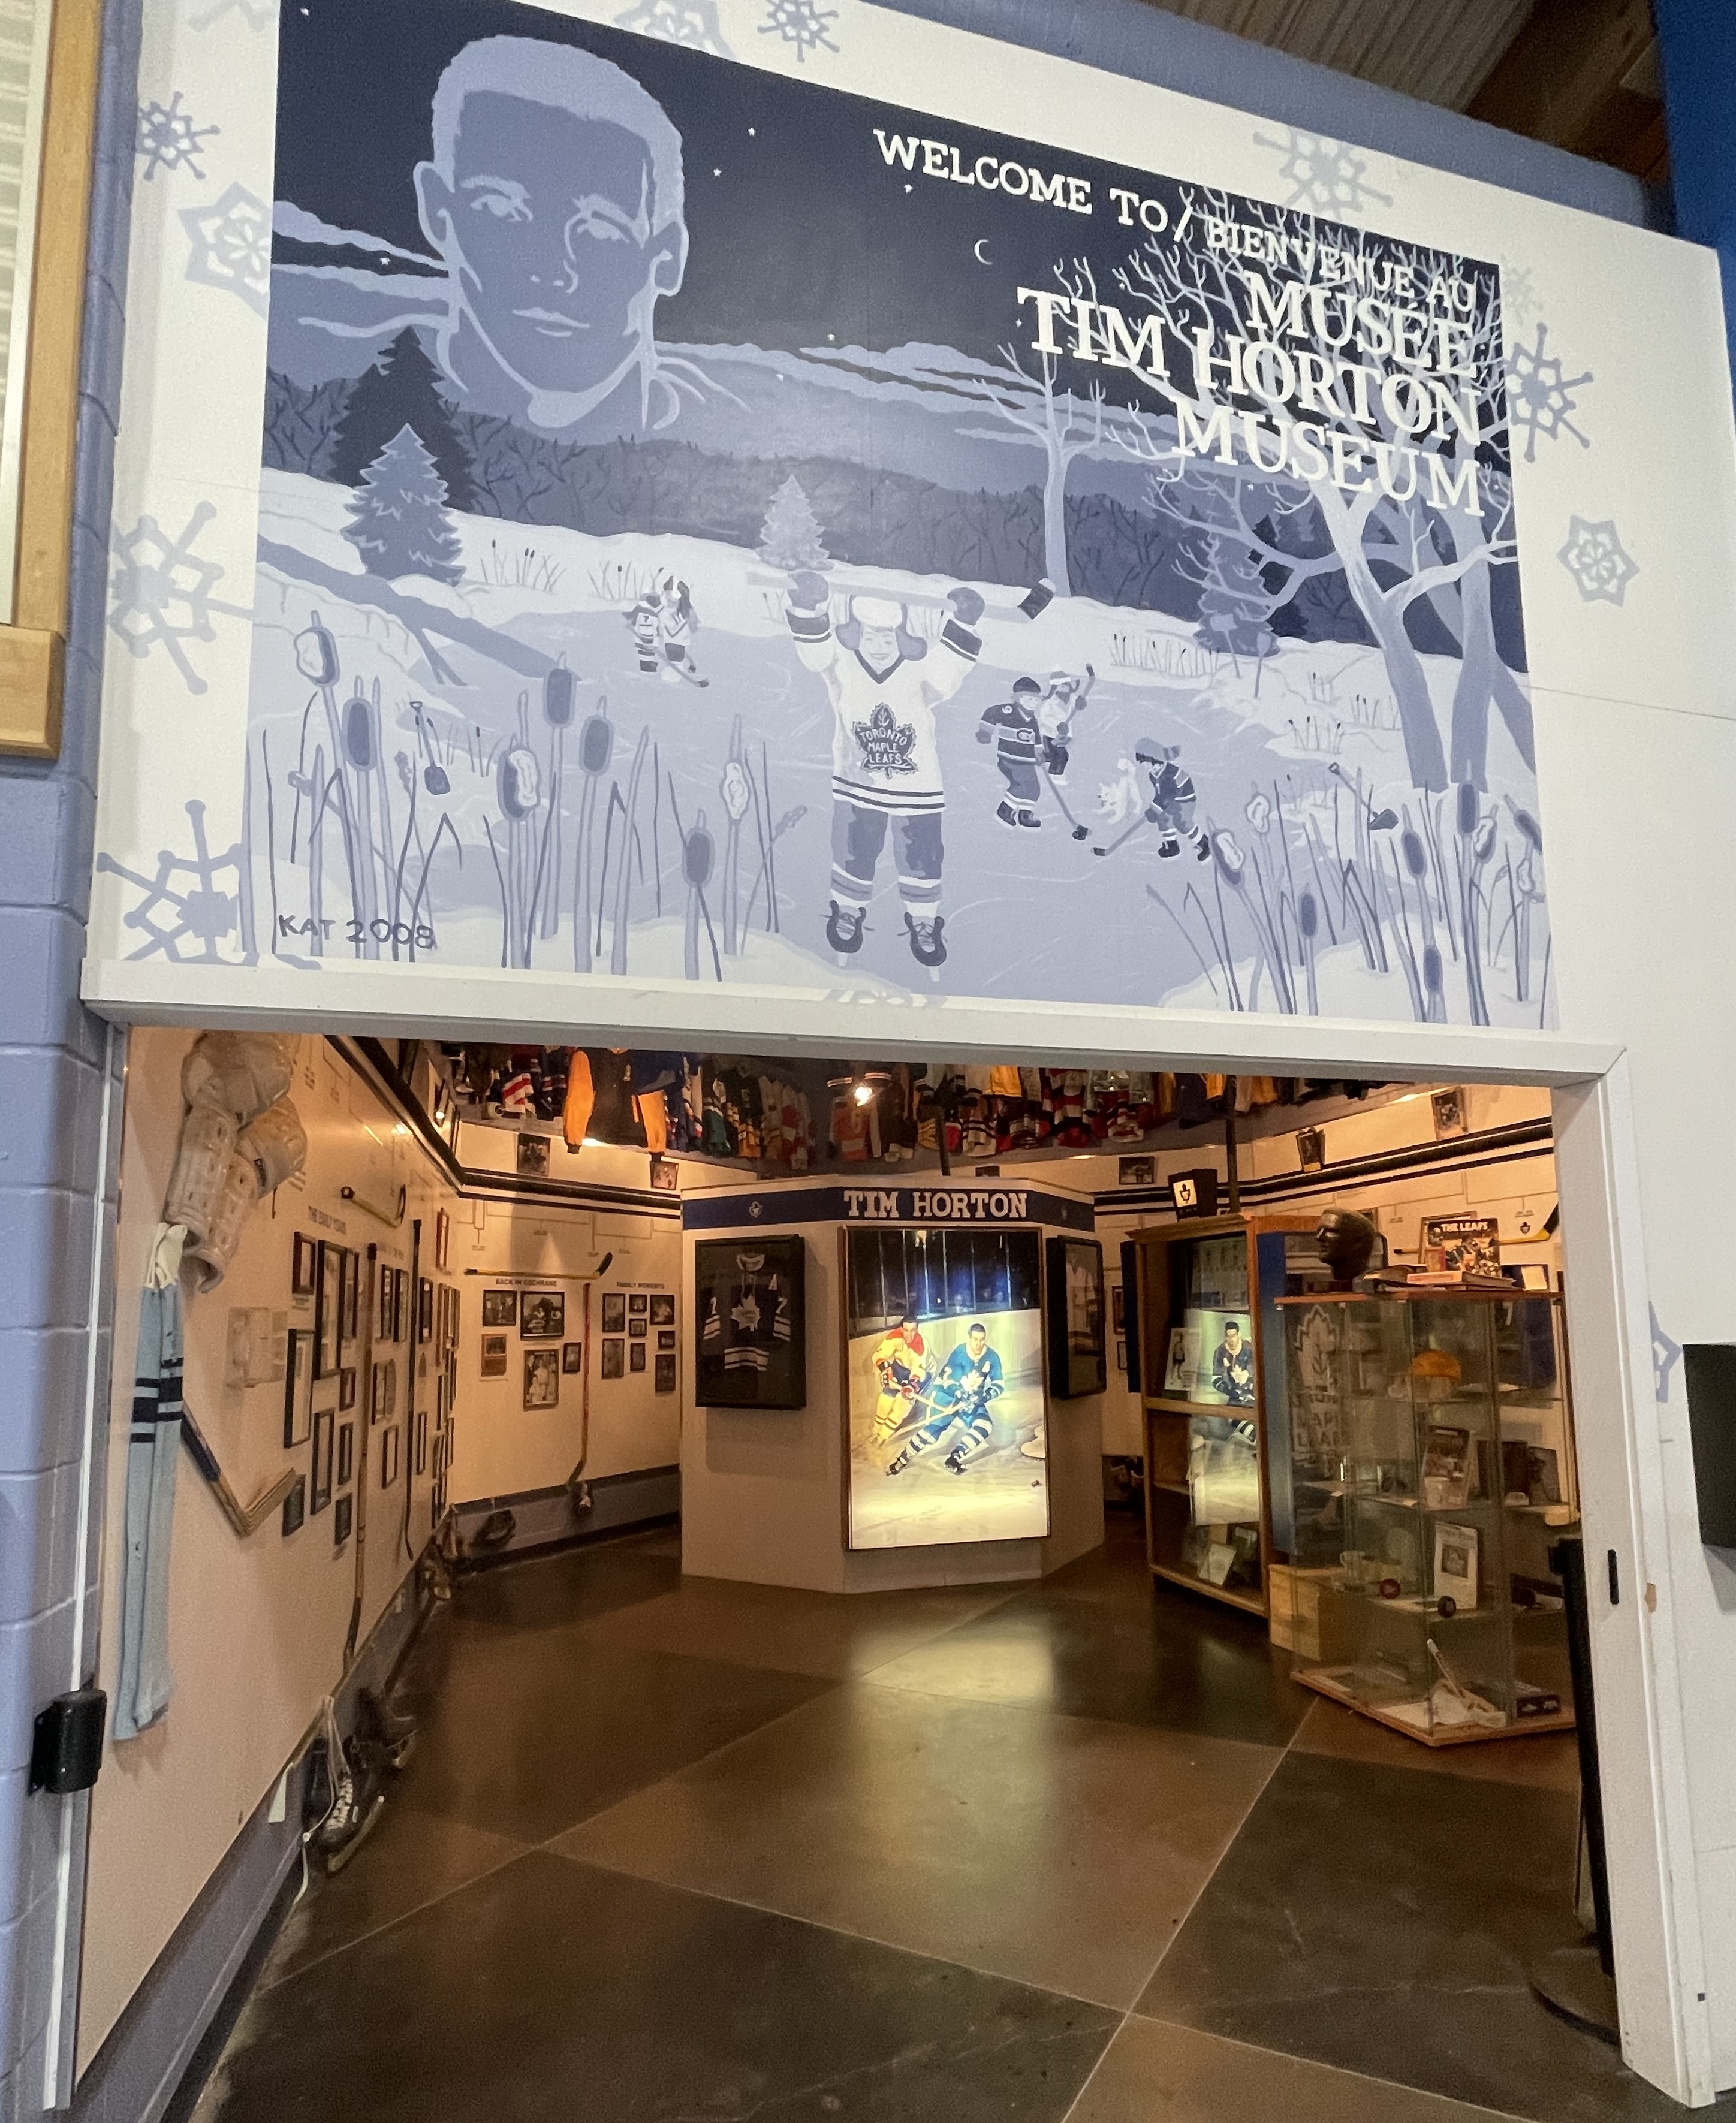 The entrance to the Tim Horton Museum, with a large sign overhead featuring graphics of the hockey player and the words "Welcome to the Tim Horton Museum".